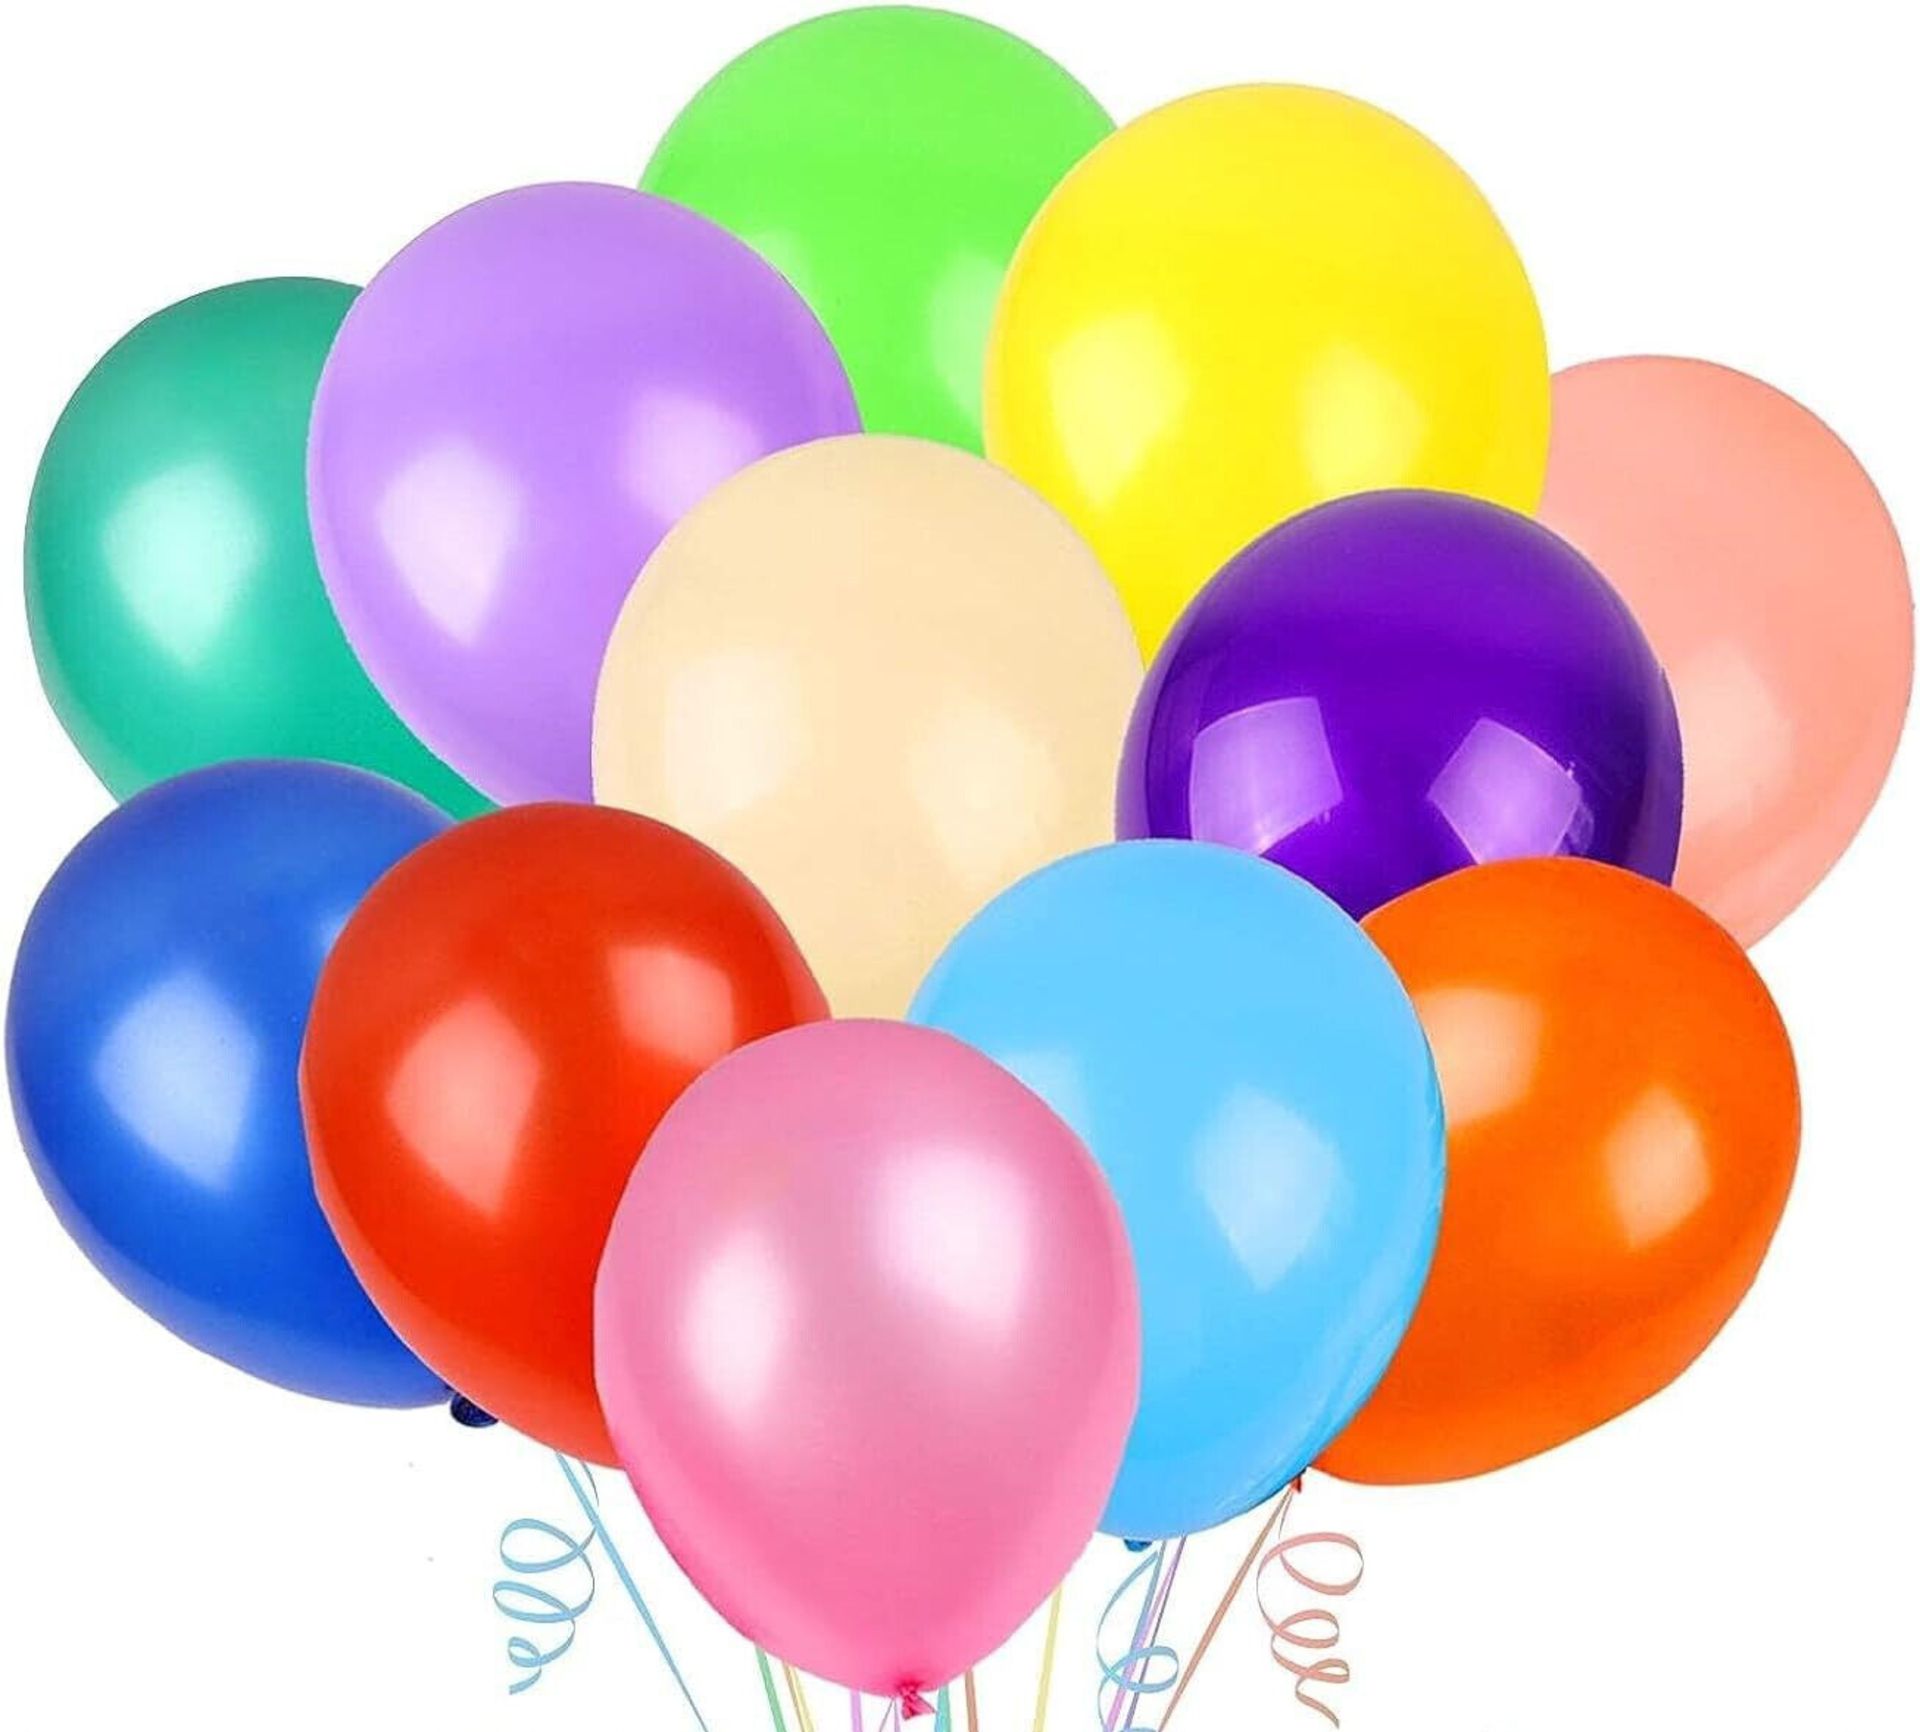 250 X NEW 9"&6" - 24 PACK ASSORTED COLOURED BALLOONS - Image 2 of 4